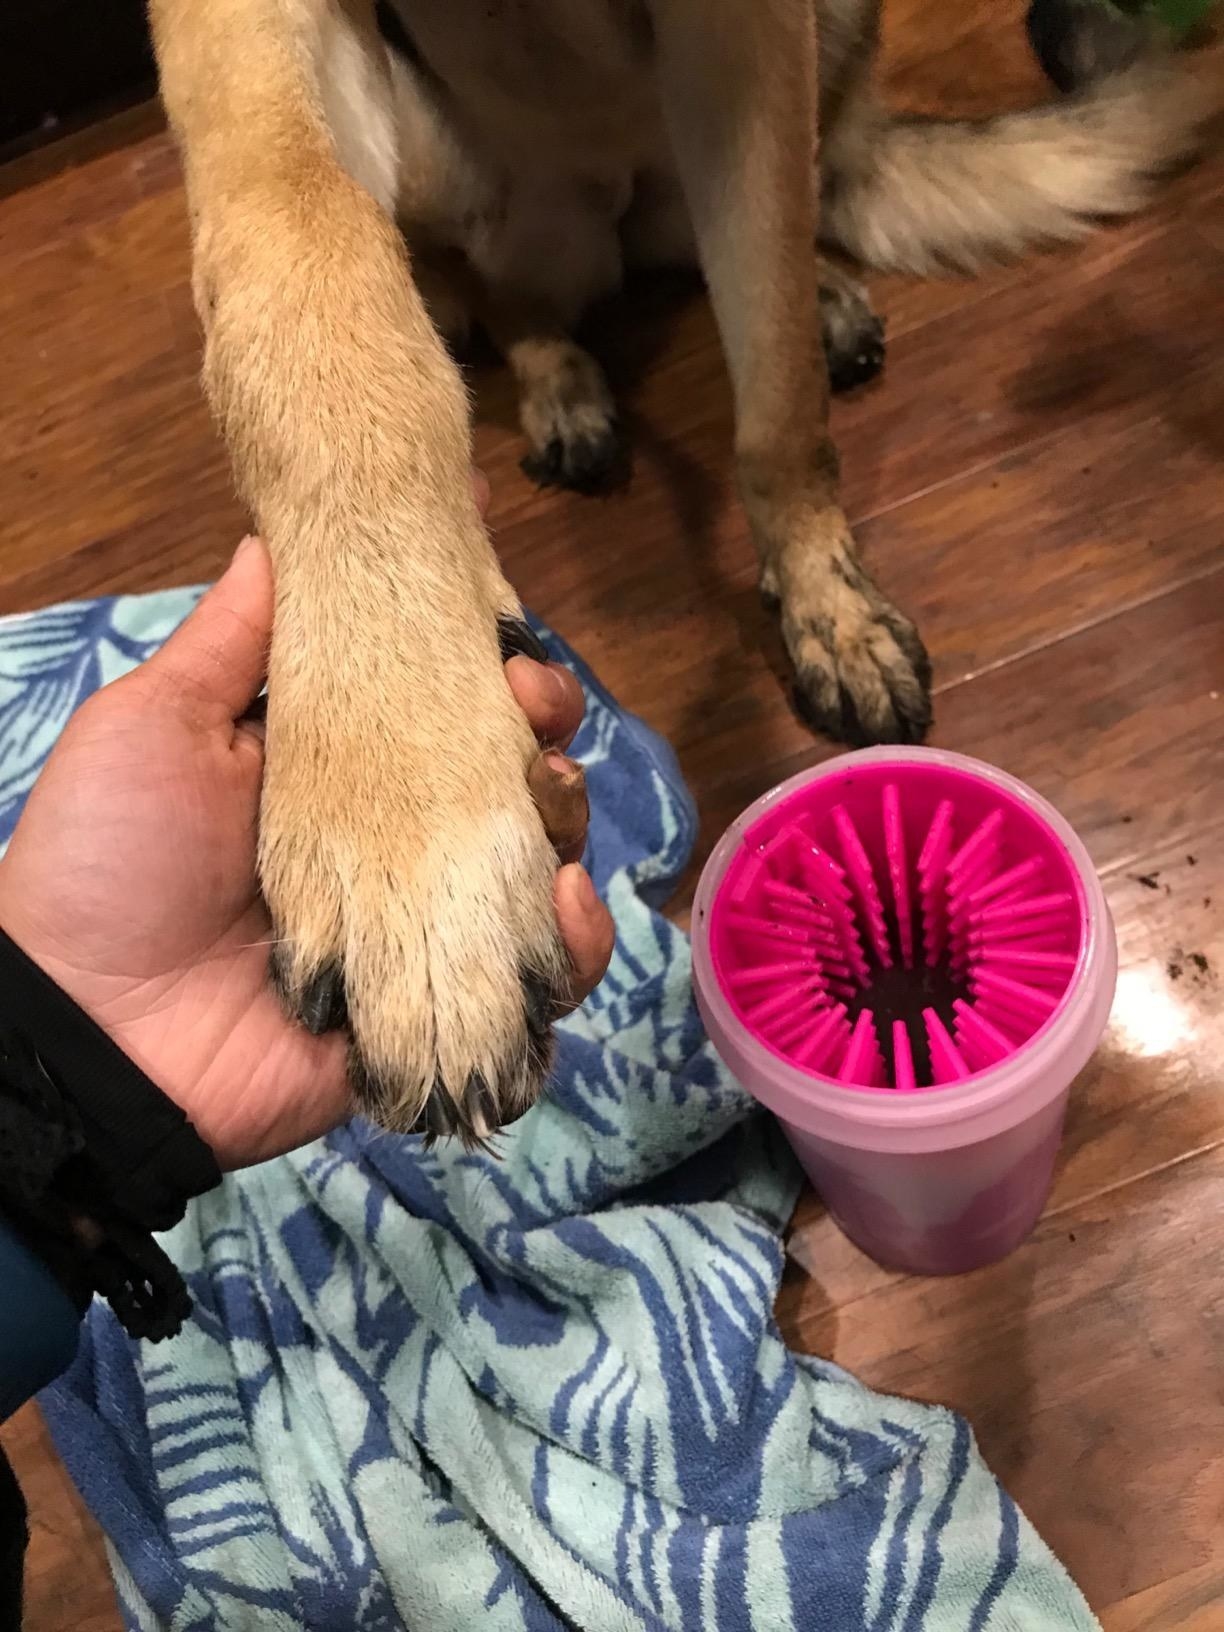 A reviewer's photo of their German shepherd using the large pink cleaner